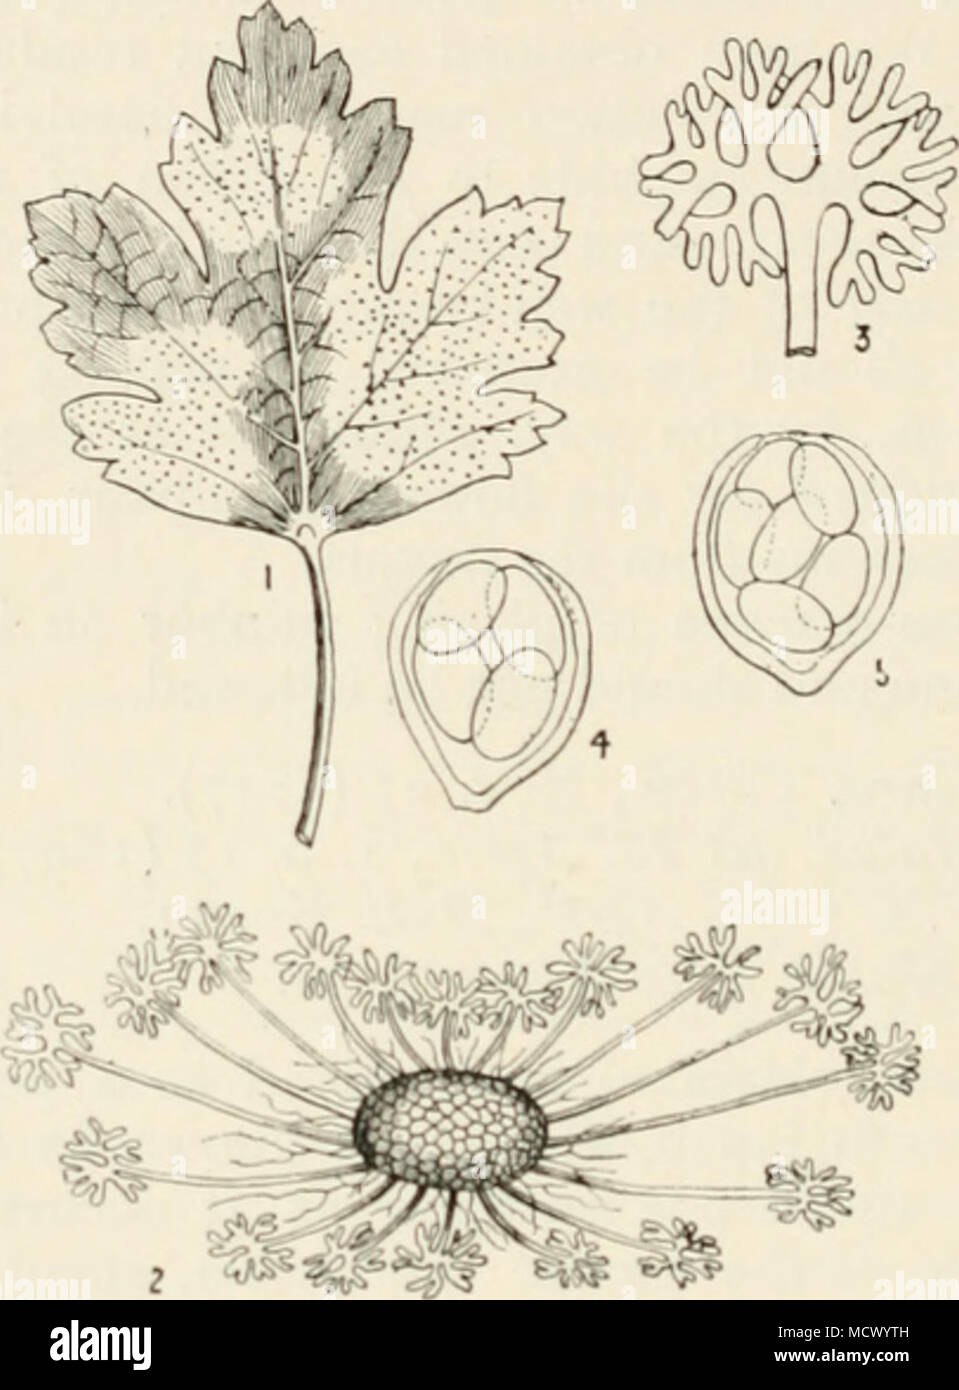 . KiG. ^o.—Microsphaera ^rossuluriac. i, gooseberry leaf with patches of mildew ; 2, a perithccium with its appi-nd- ages; 3, tip of an appendage ; 4 and 5, asci containing sjiorcs. Fig. I nat. size ; the remainder highly mag. season, and is readily recognised under the microscope by the elaborate tips of the appendages. Mycelium delicate, greyish-white on both surfaces of the leaf; perithecia usually in small, scattered groups, dark brown, appendages once or twice as long as diameter of j)eridium, 4-6 times forked at the tip; asci 3-10, ovate, containing 3-6 spores of variable size, 20-30 x 1 Stock Photo